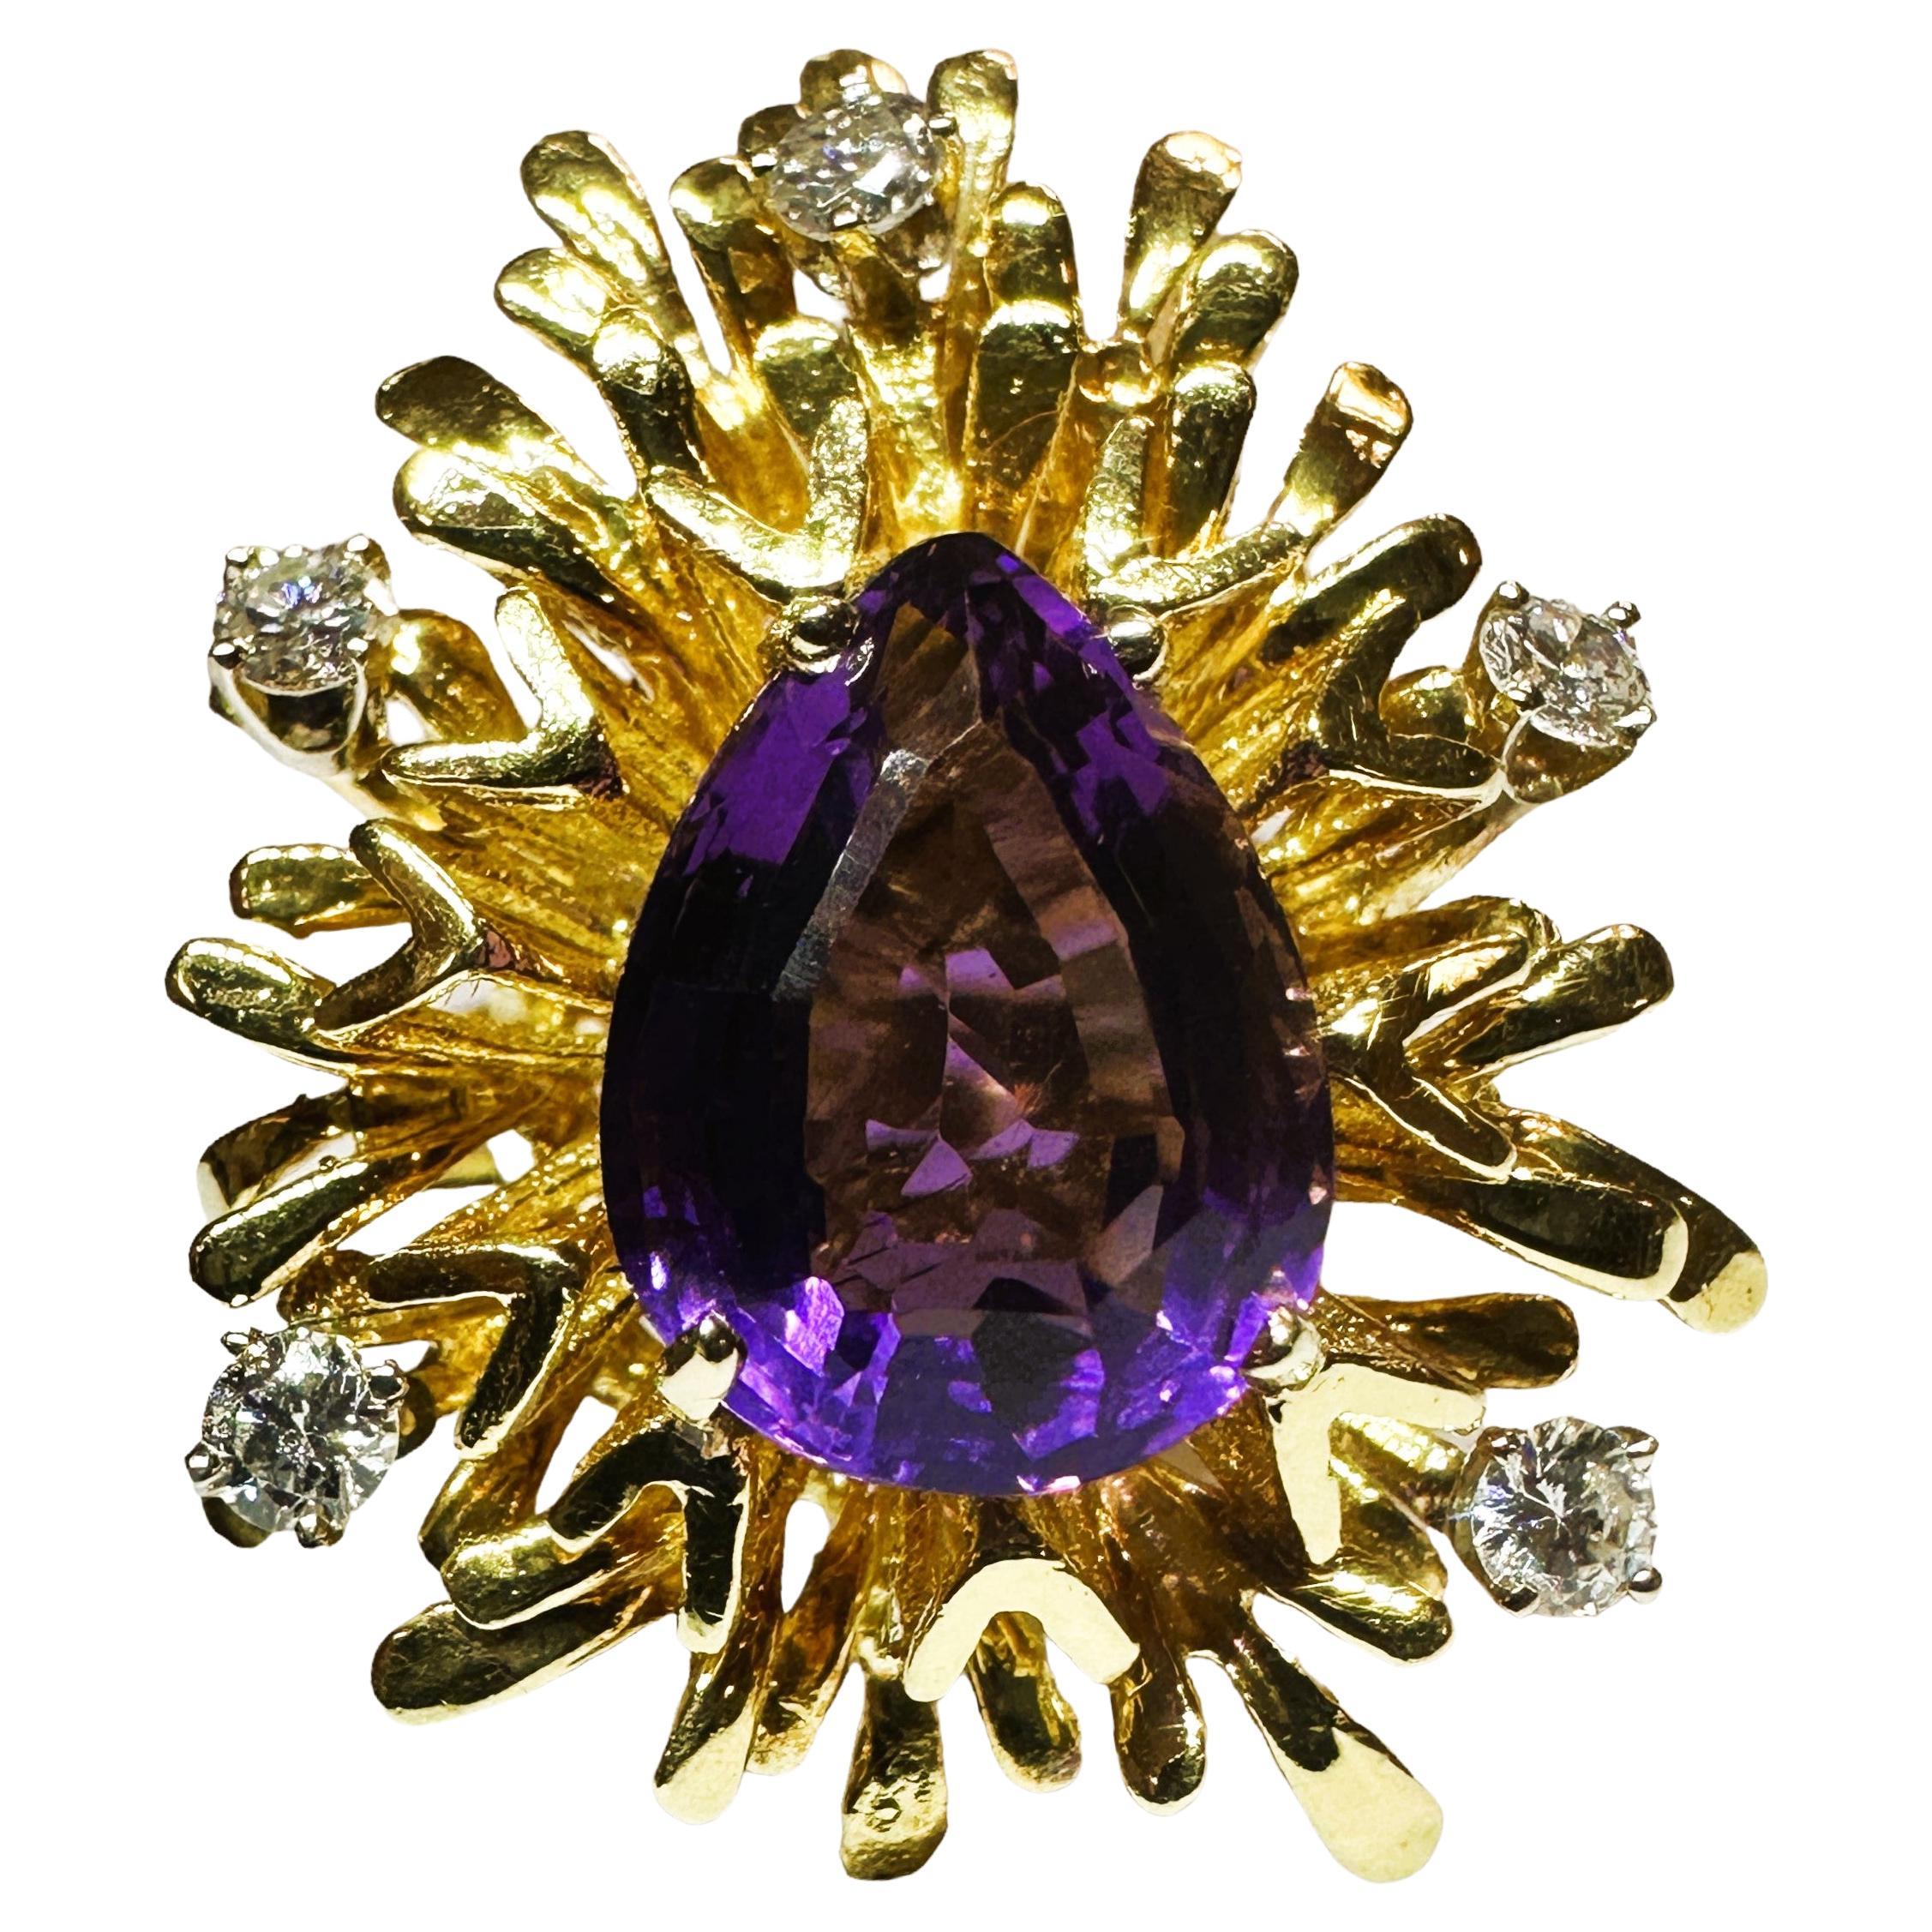 18K YG 4 Ct Amethyst & .25 Ct Diamond Ring Size 7.25 with Appraisal For Sale